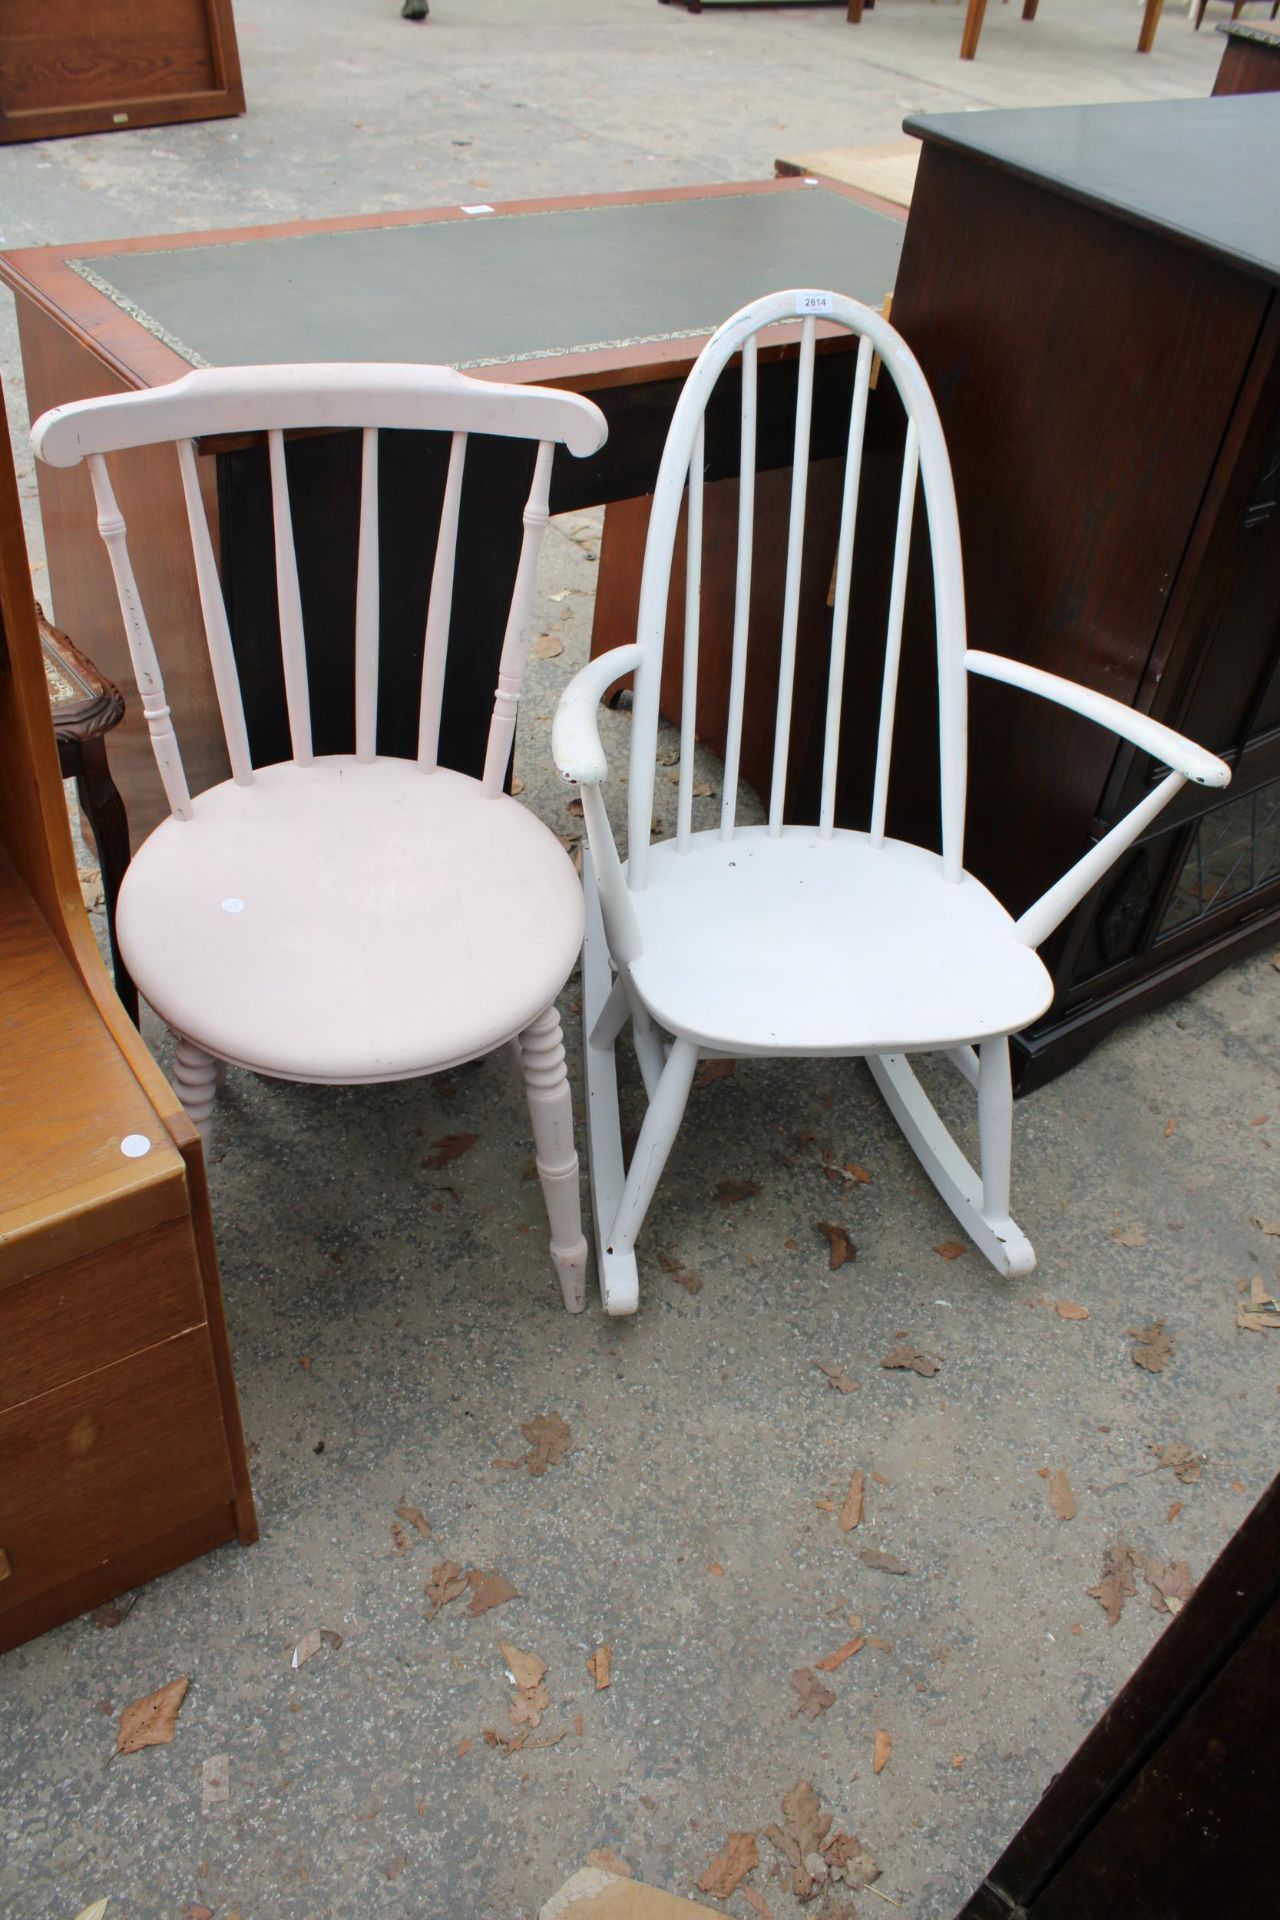 A PAINTED VICTORIAN KITCHEN CHAIR AND A PAINTED ERCOL STYLE ROCKING CHAIR